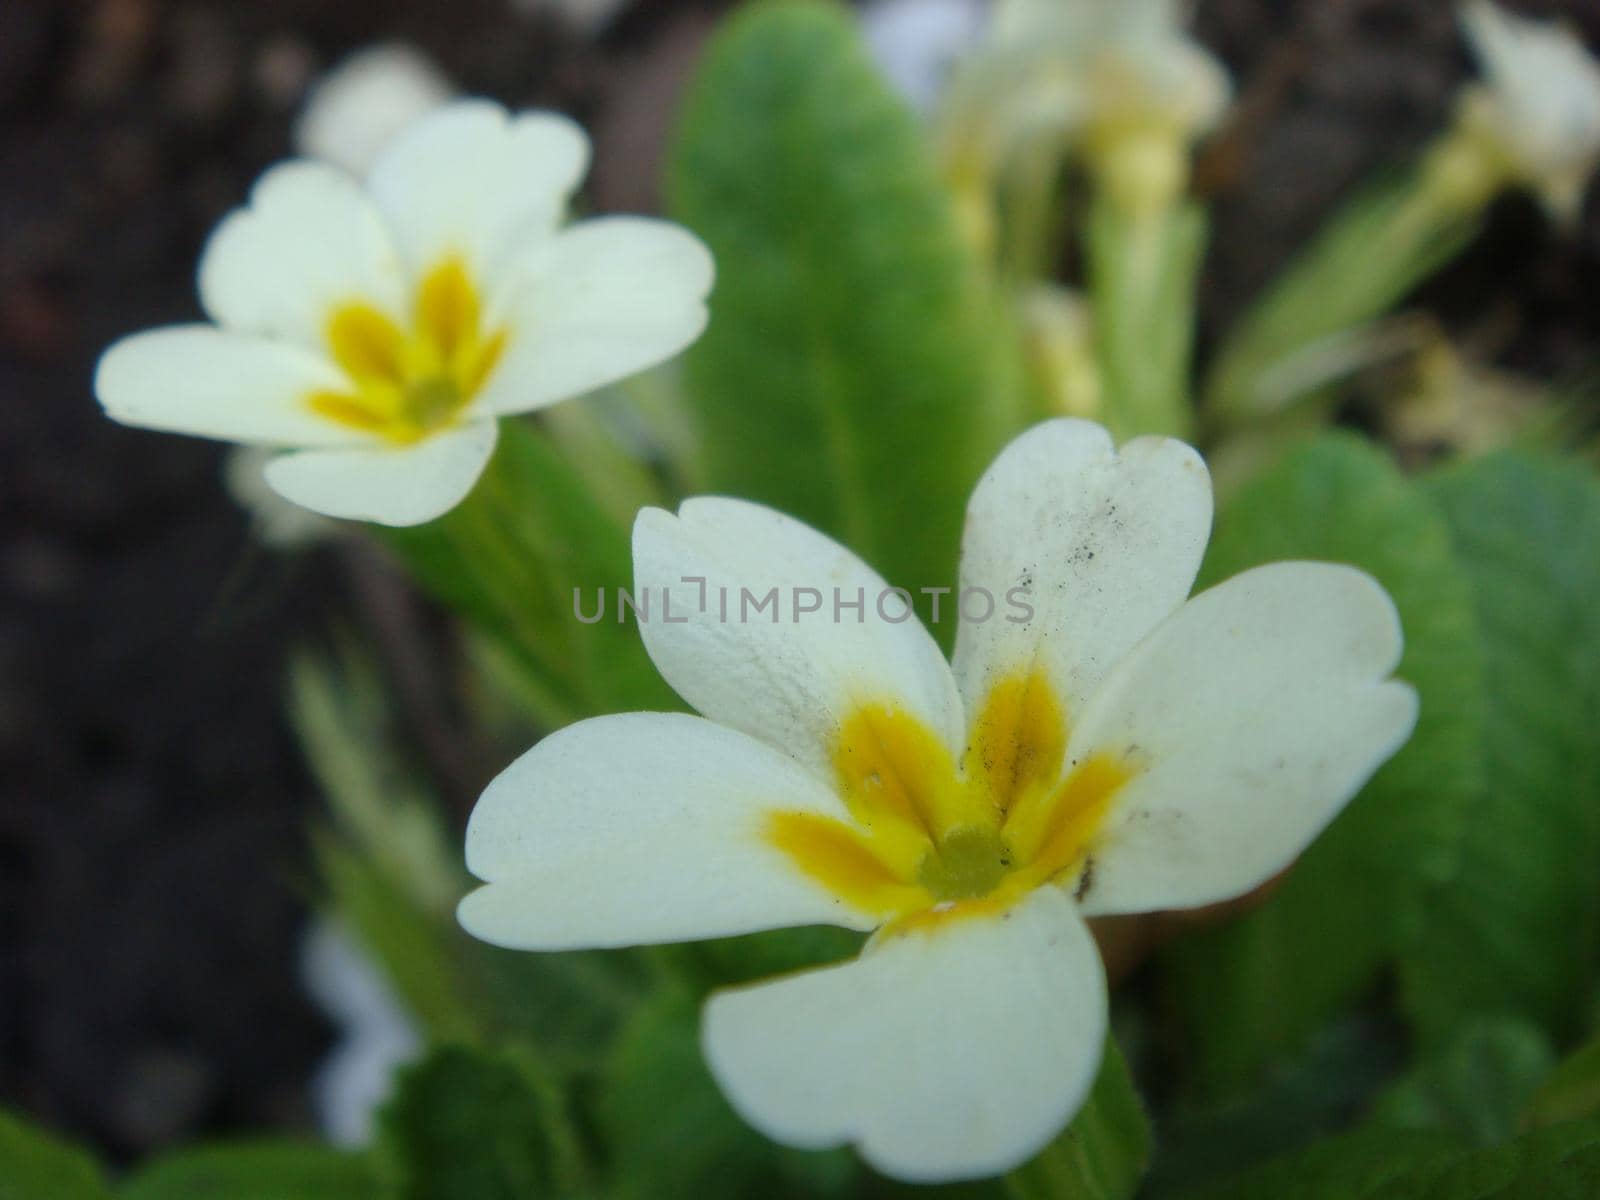 White flowers of primroses (primula) vulgaris or English primrose spring bloom in the garden. Delicate petals and stamens which attract bees to the garden searching for pollen in springtime.